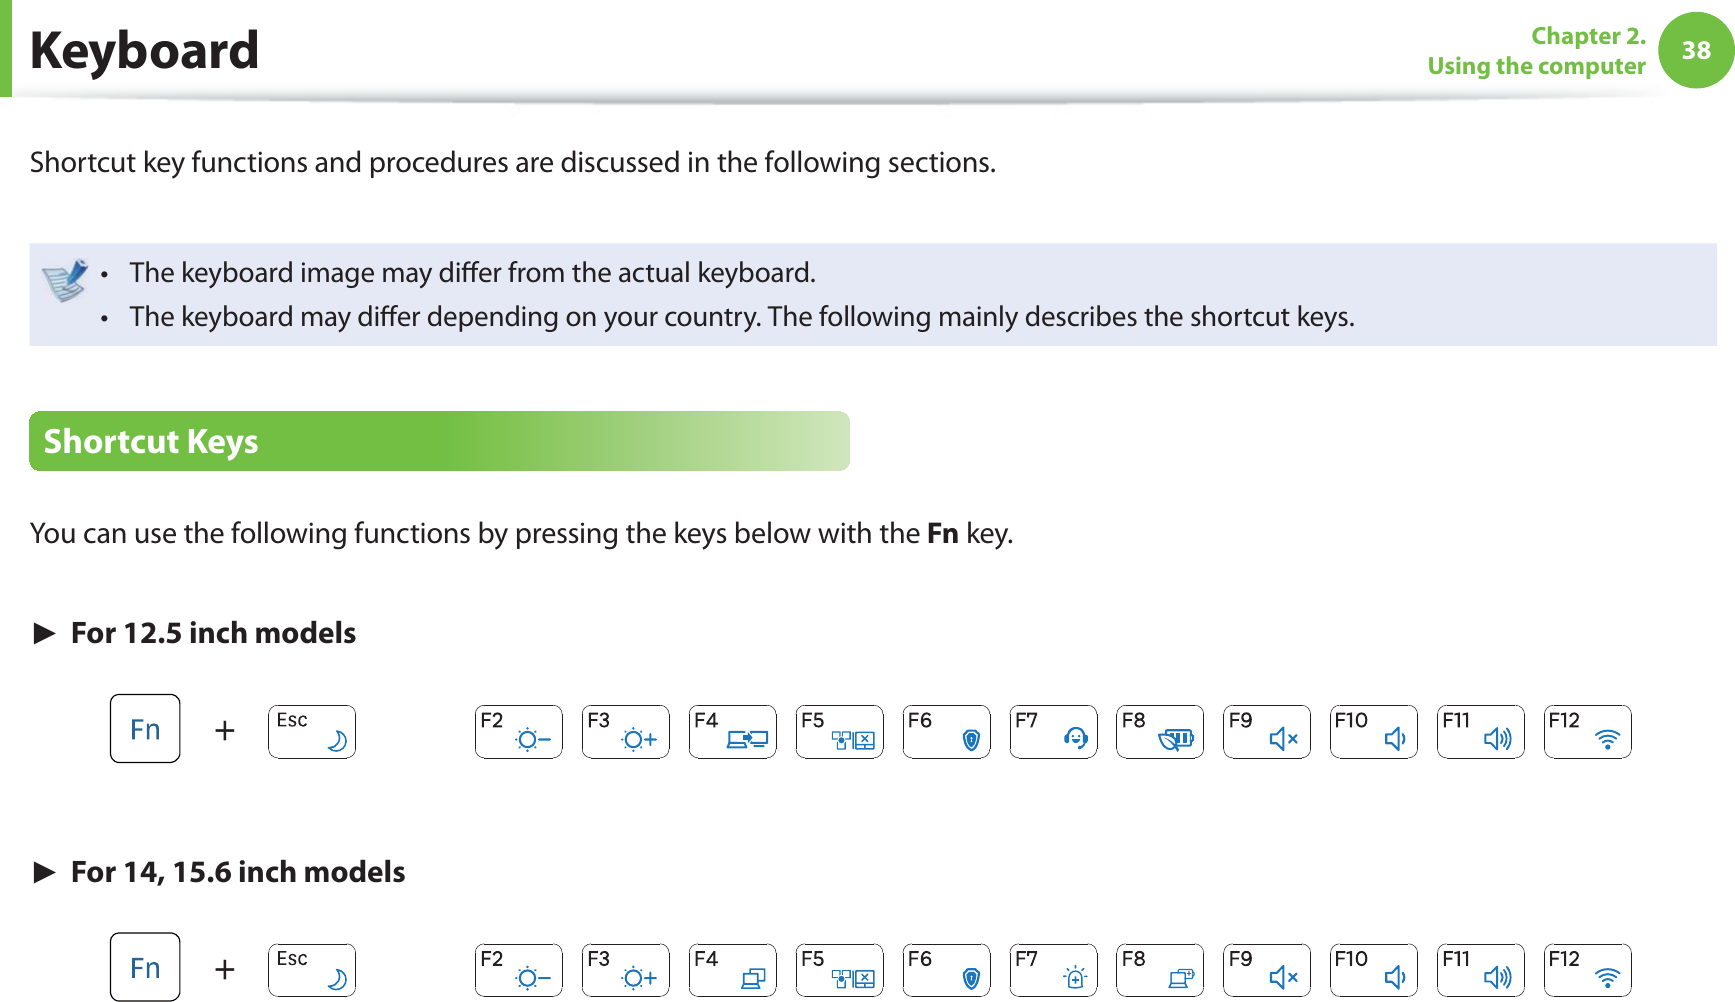 38Chapter 2. Using the computer KeyboardShortcut key functions and procedures are discussed in the following sections.The keyboard image may diﬀ er from the actual keyboard.t The keyboard may diﬀ er depending on your country. The following mainly describes the shortcut keys.t  Shortcut  KeysYou can use the following functions by pressing the keys below with the Fn key.► For 12.5 inch models► For 14, 15.6 inch models